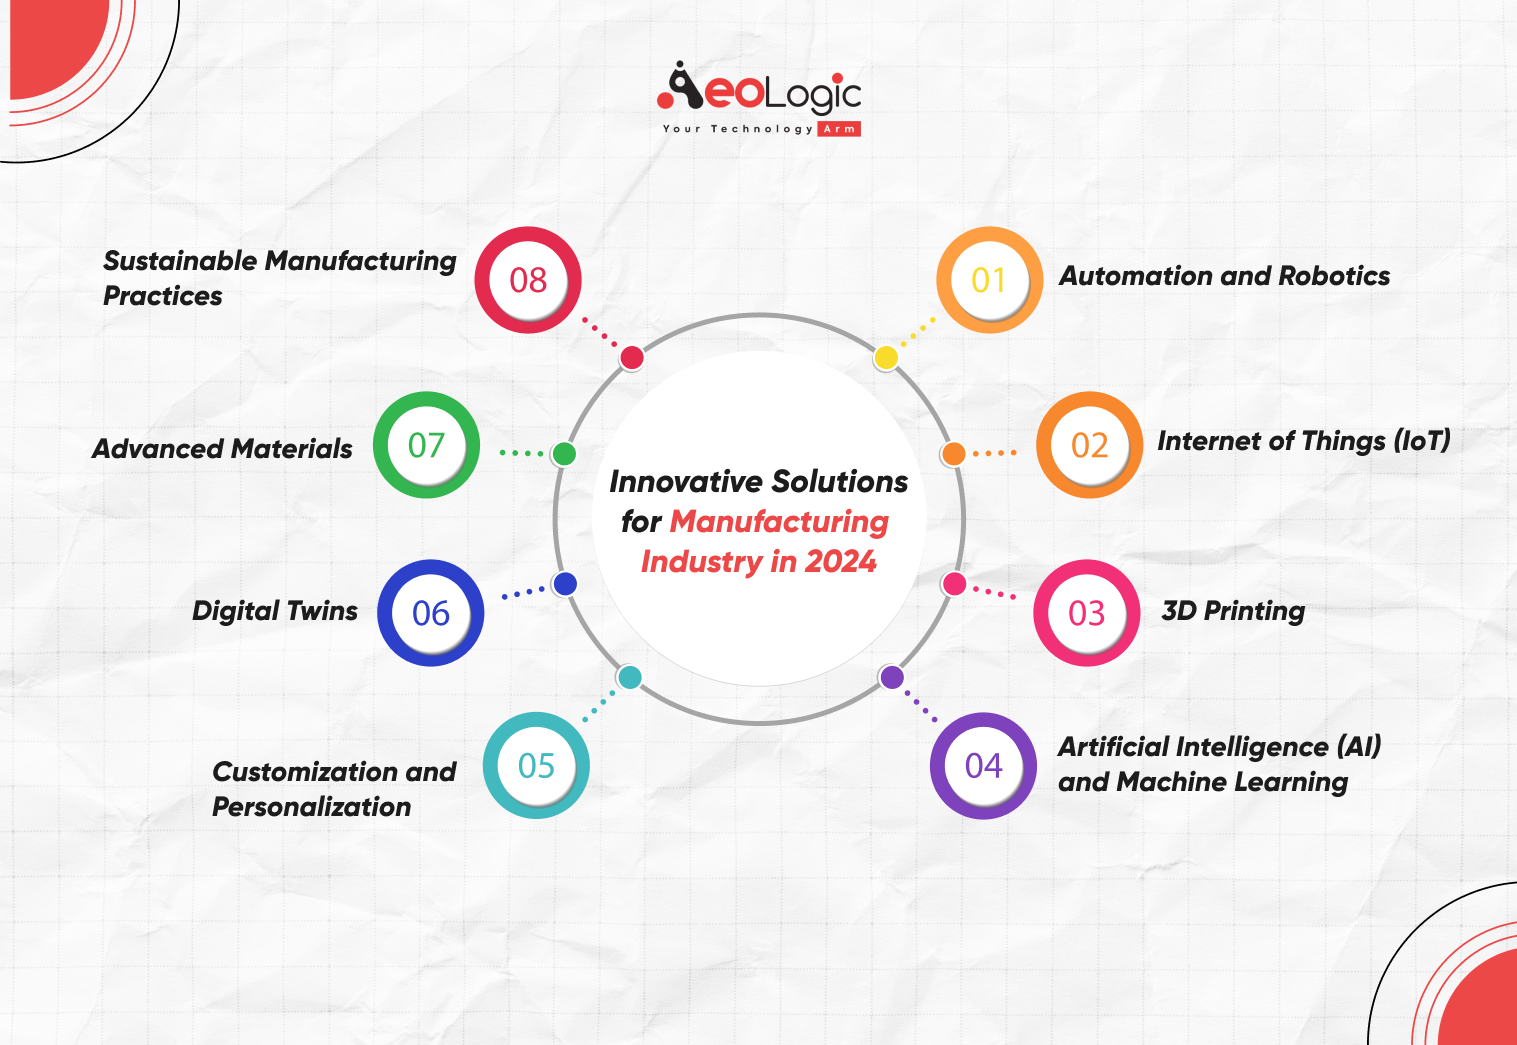 Innovative Solutions for Manufacturing Industry in 2024